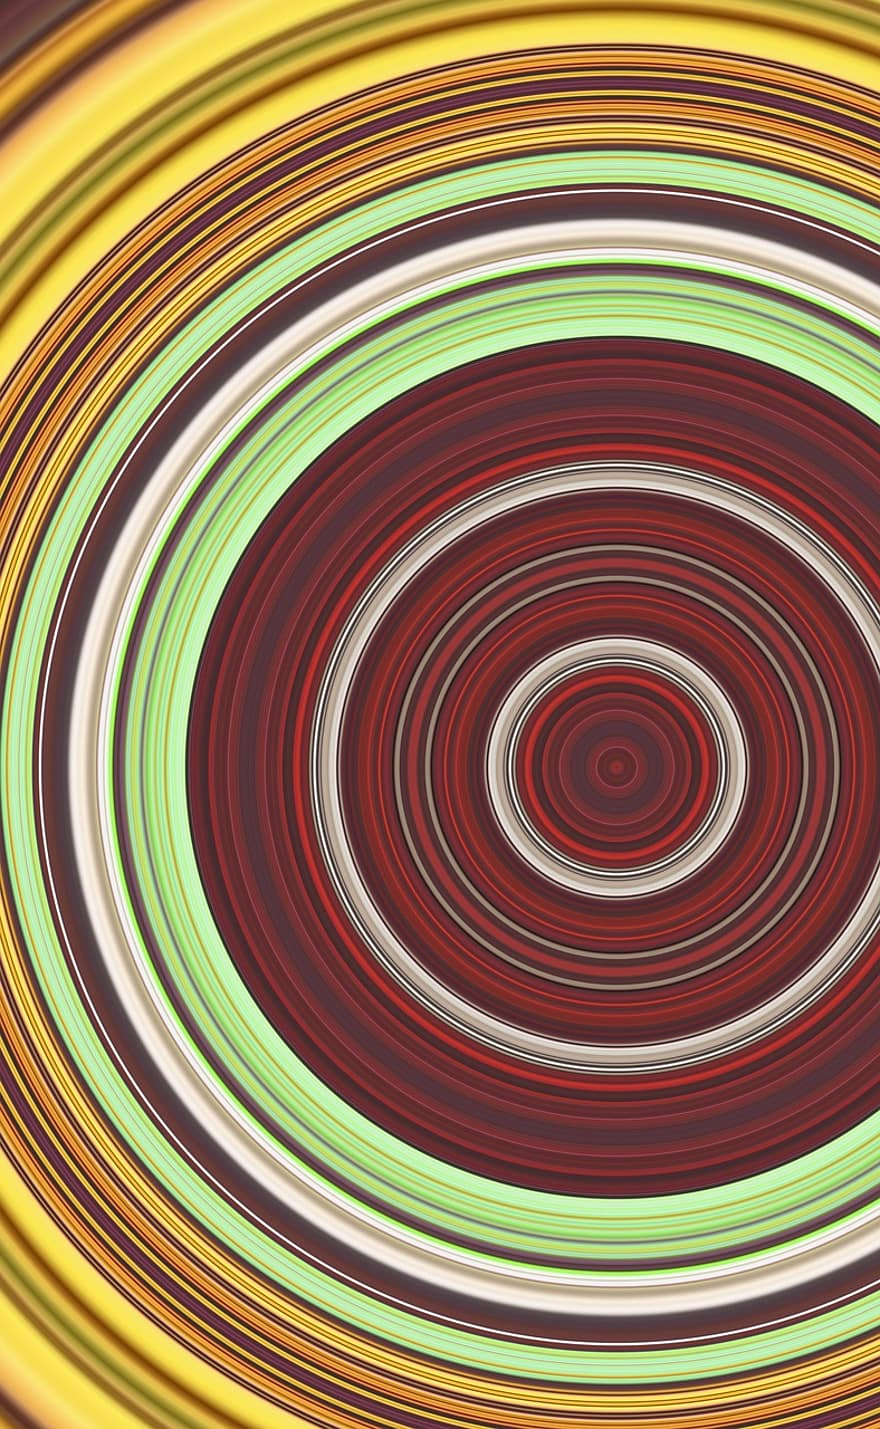 Concentric, Abstract, Geometric, Circles, Colorful, Background, Scrapbooking, Wallpaper, Shapes, Decorative, Decoration